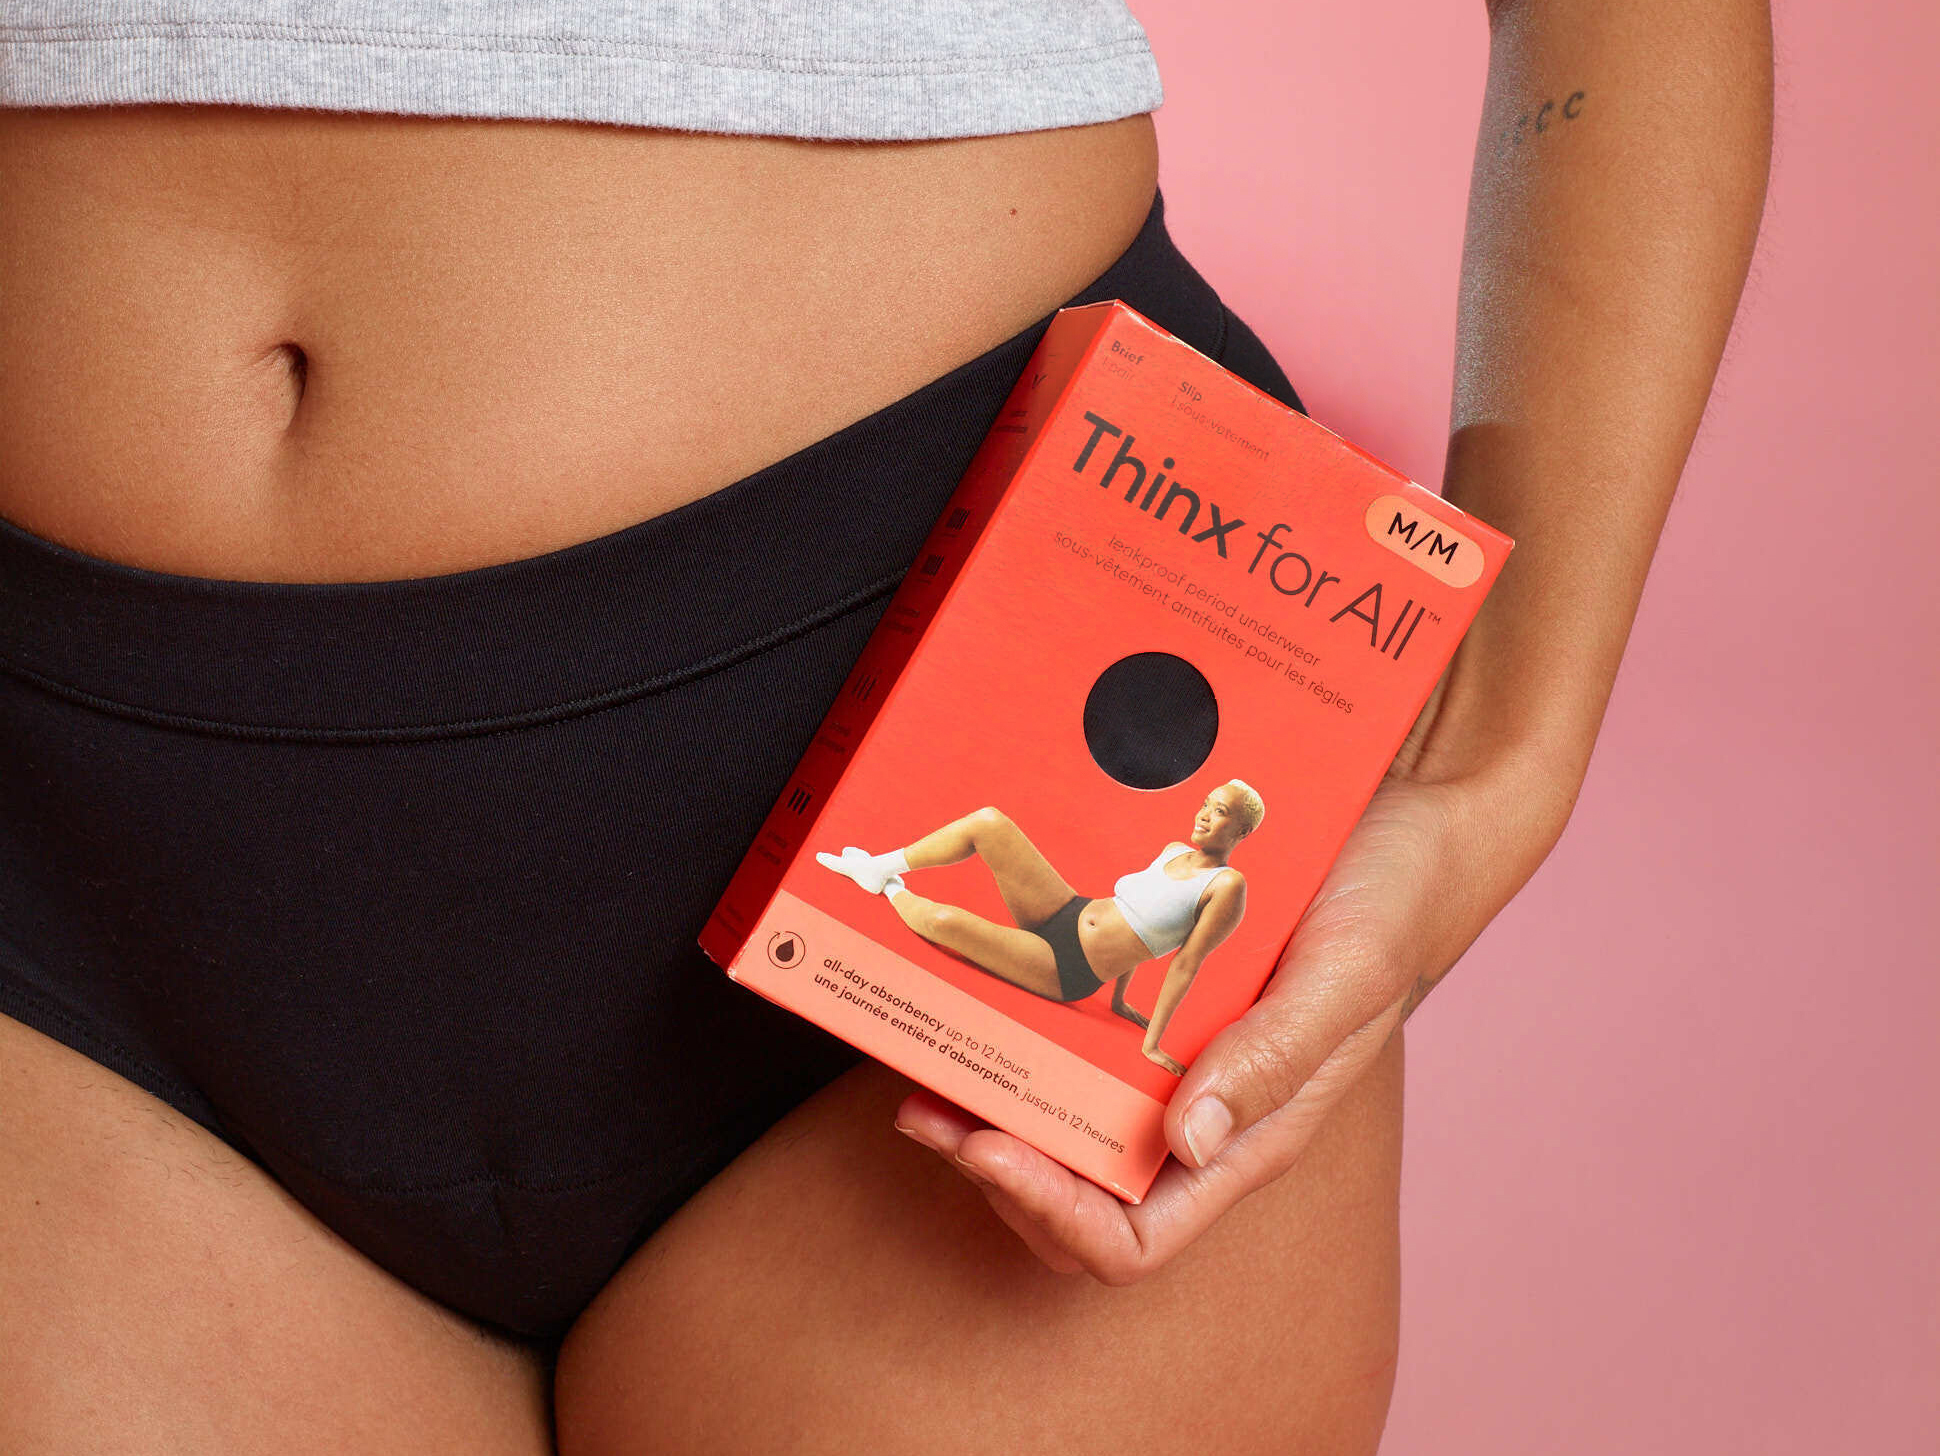 Thinx: The Period Underwear that's Making “That Time of the Month